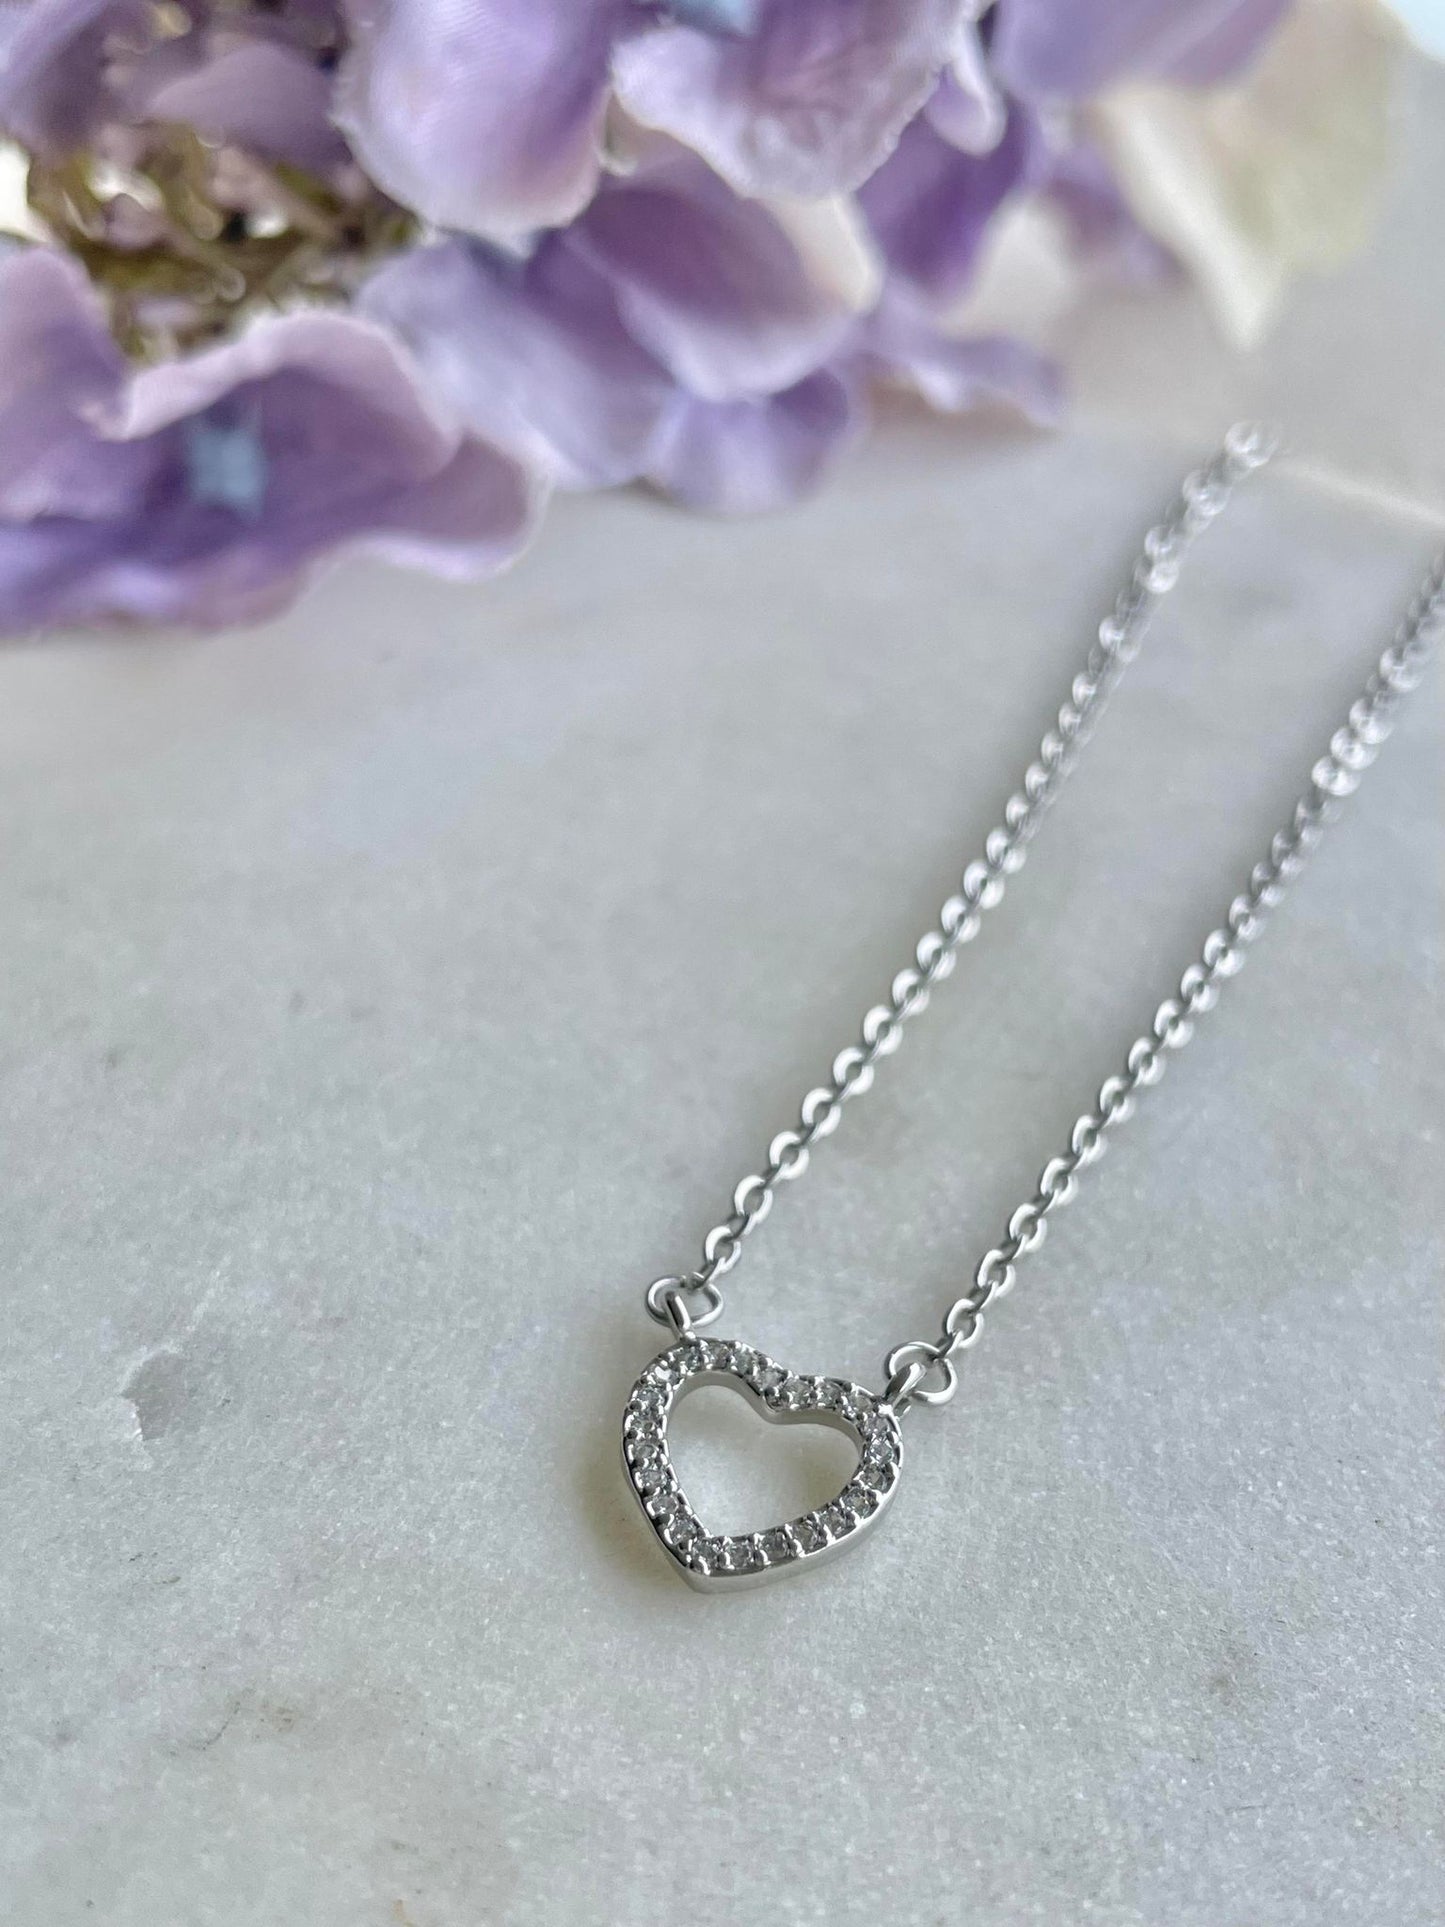 Where my heart is silver necklace